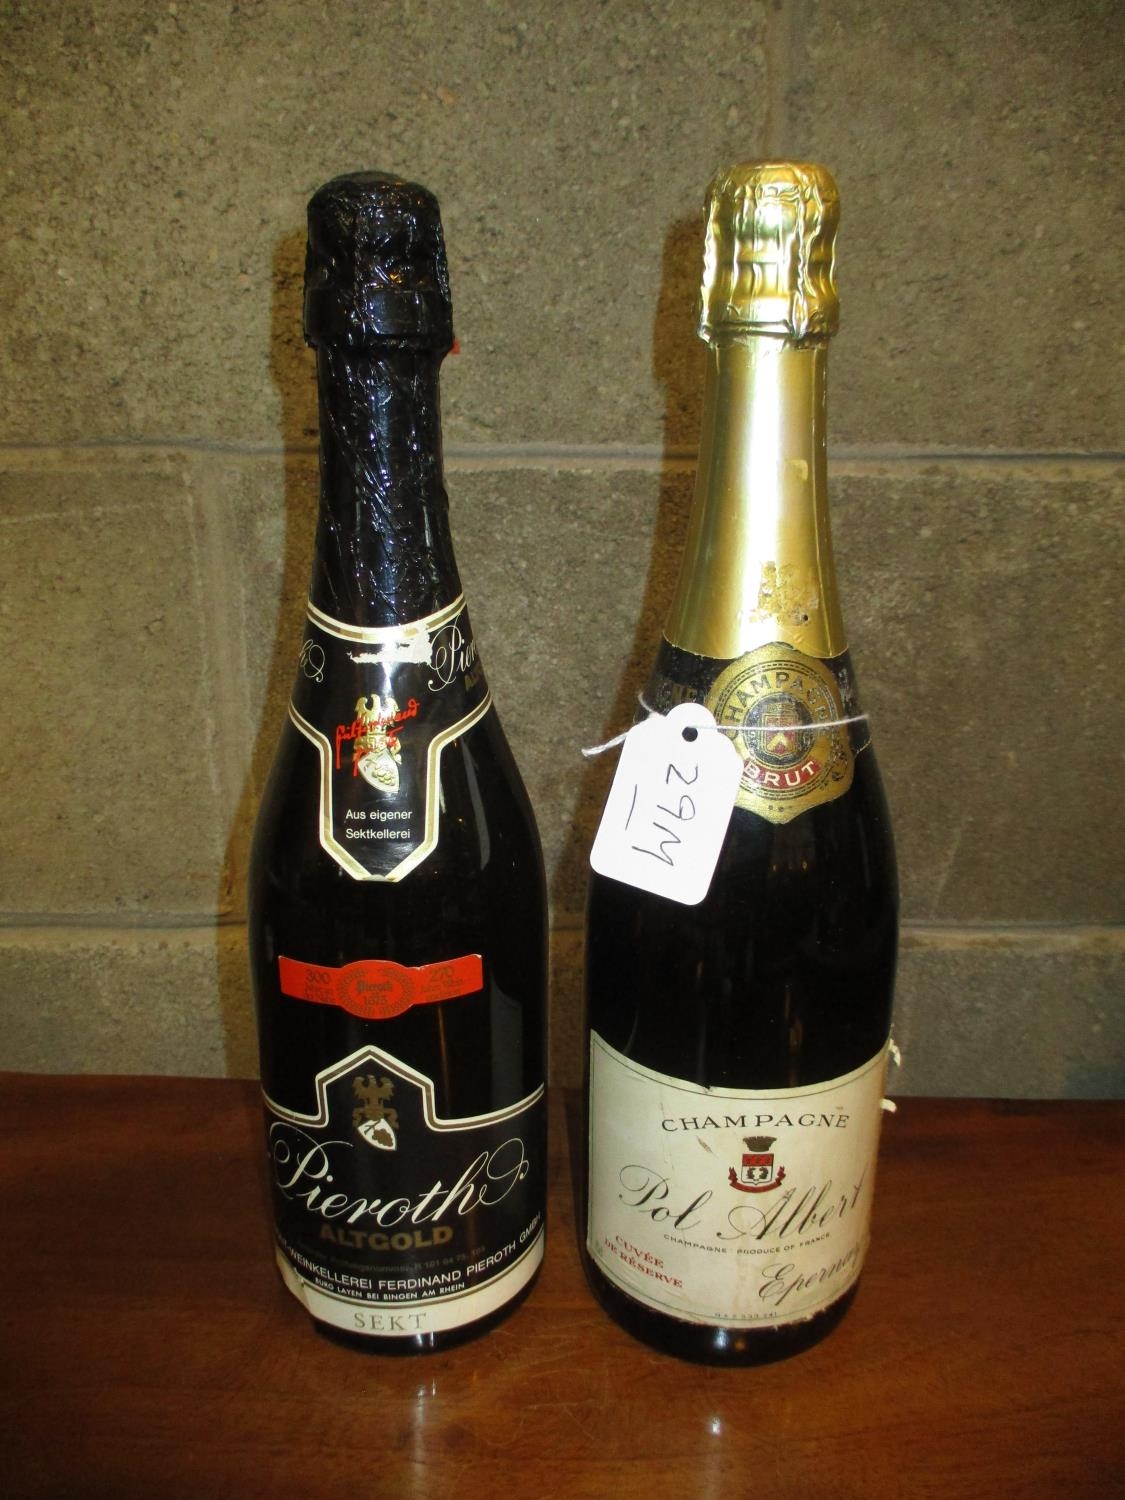 Pol Albert Champagne Cuvee De Reserve Epernay and Pieroth Altgold Sekt